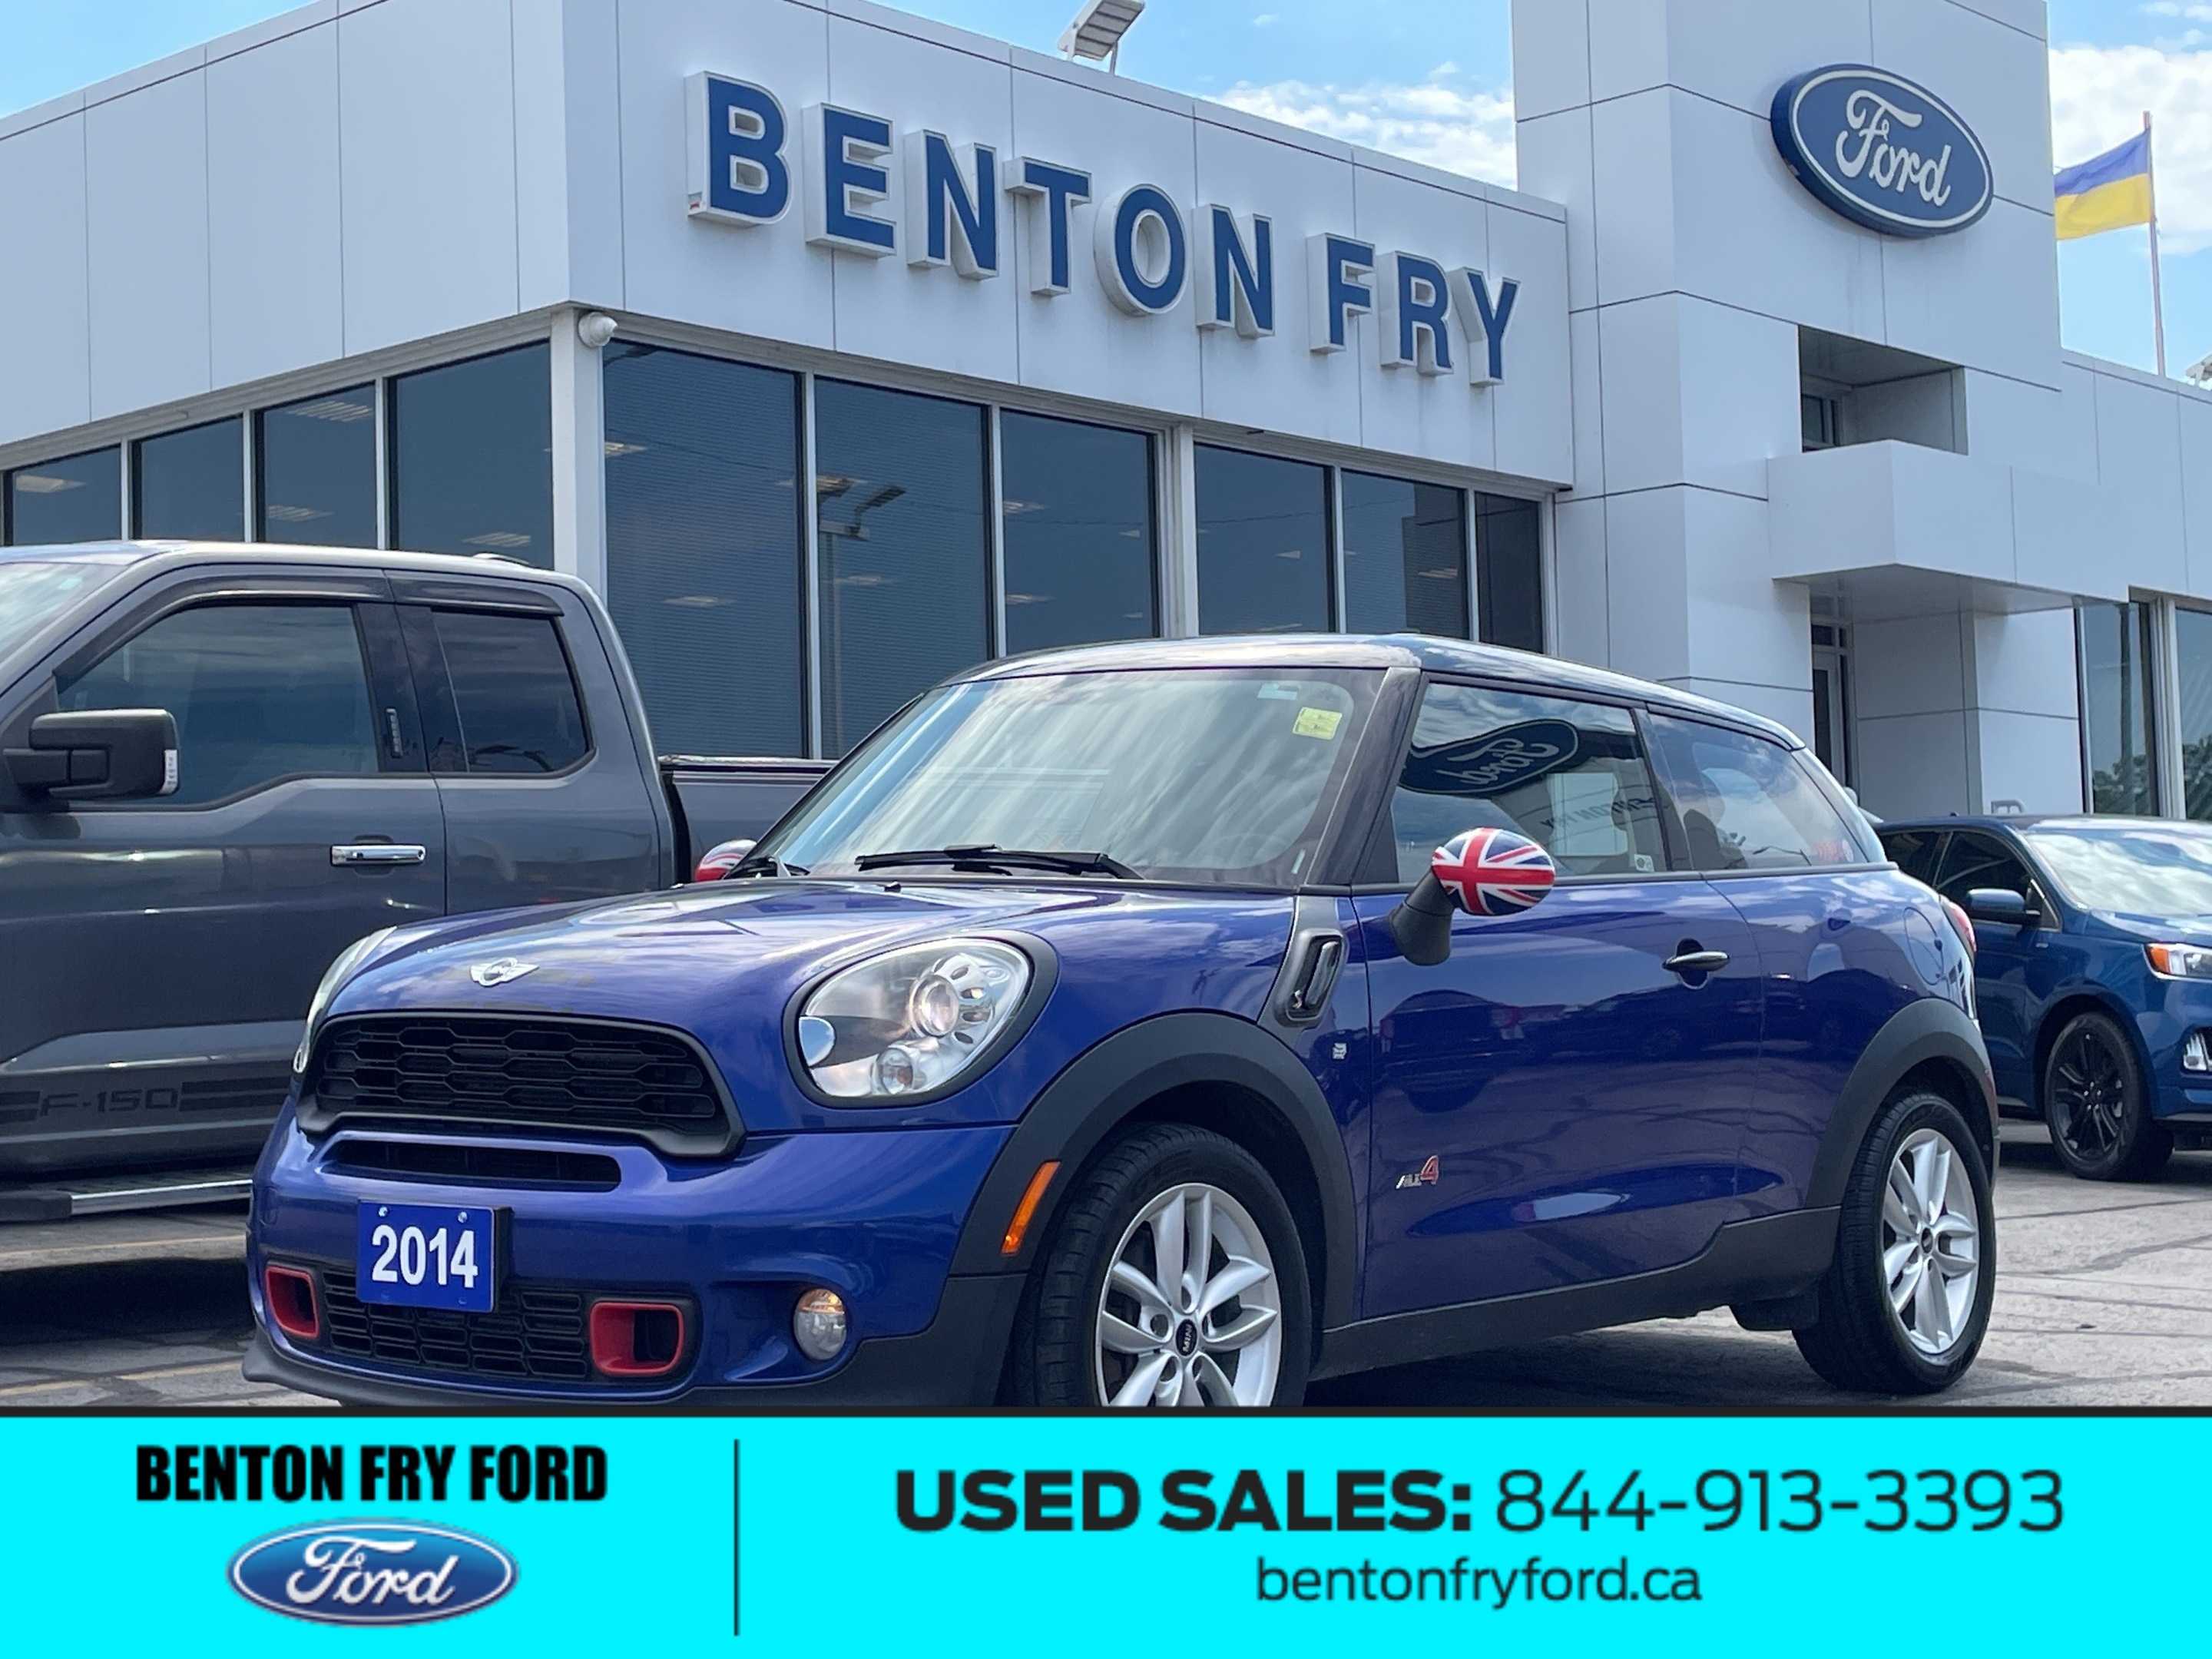 2014 MINI Cooper Paceman S - 1.6 BLUE TOOTH A/C HEATED SEATS CRUISE CONTROL